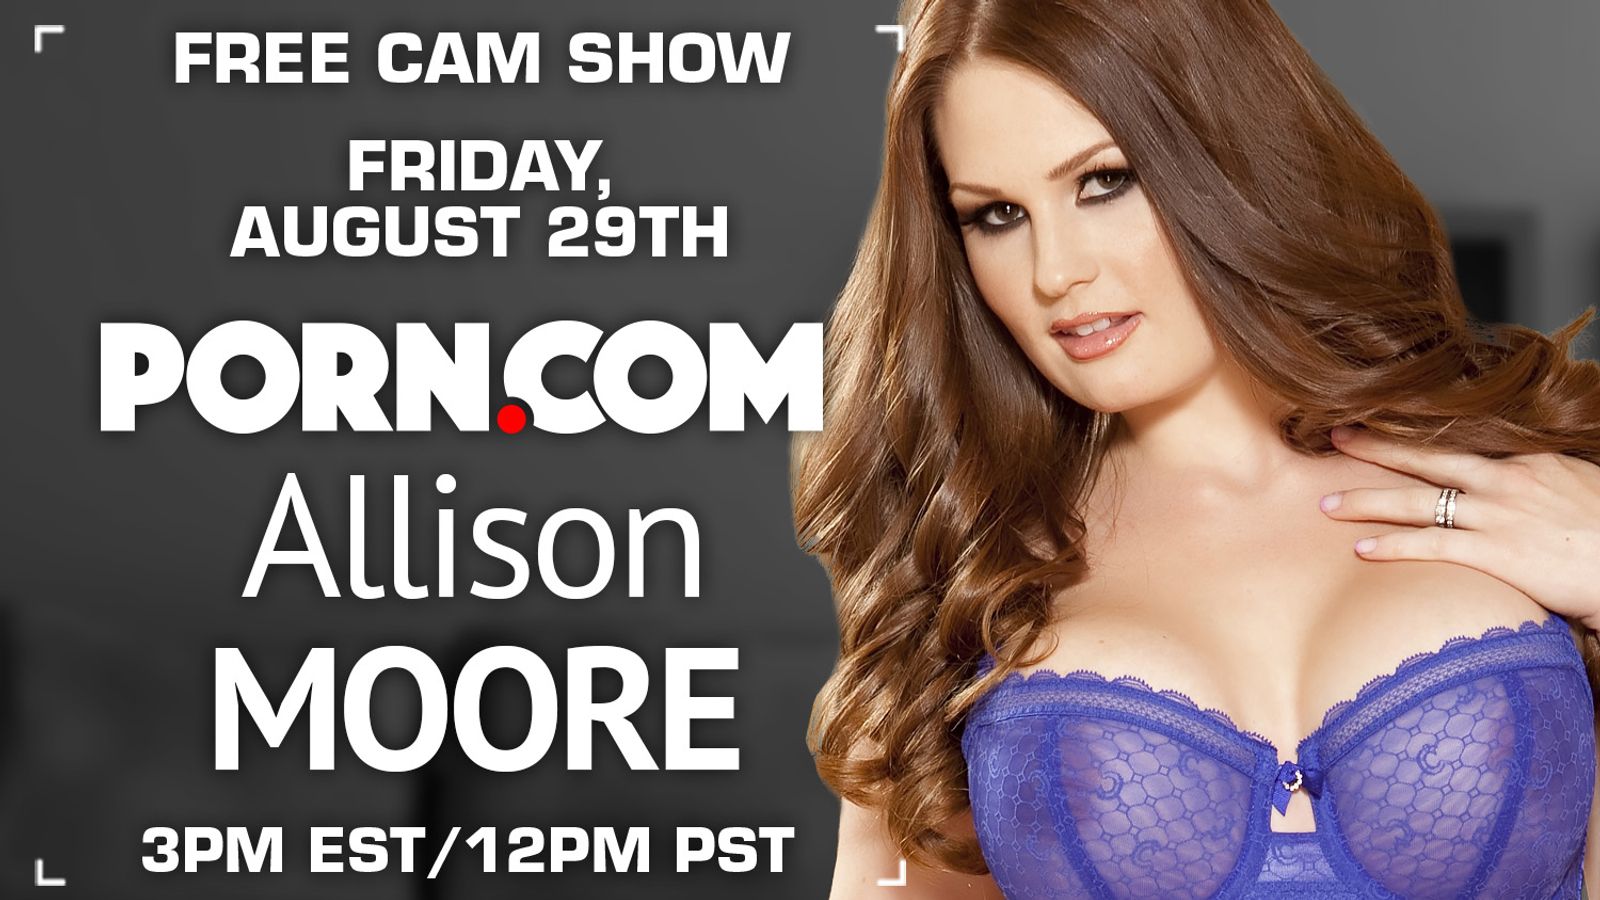 Porn.com's Free Cam Show This Friday Features Allison Moore